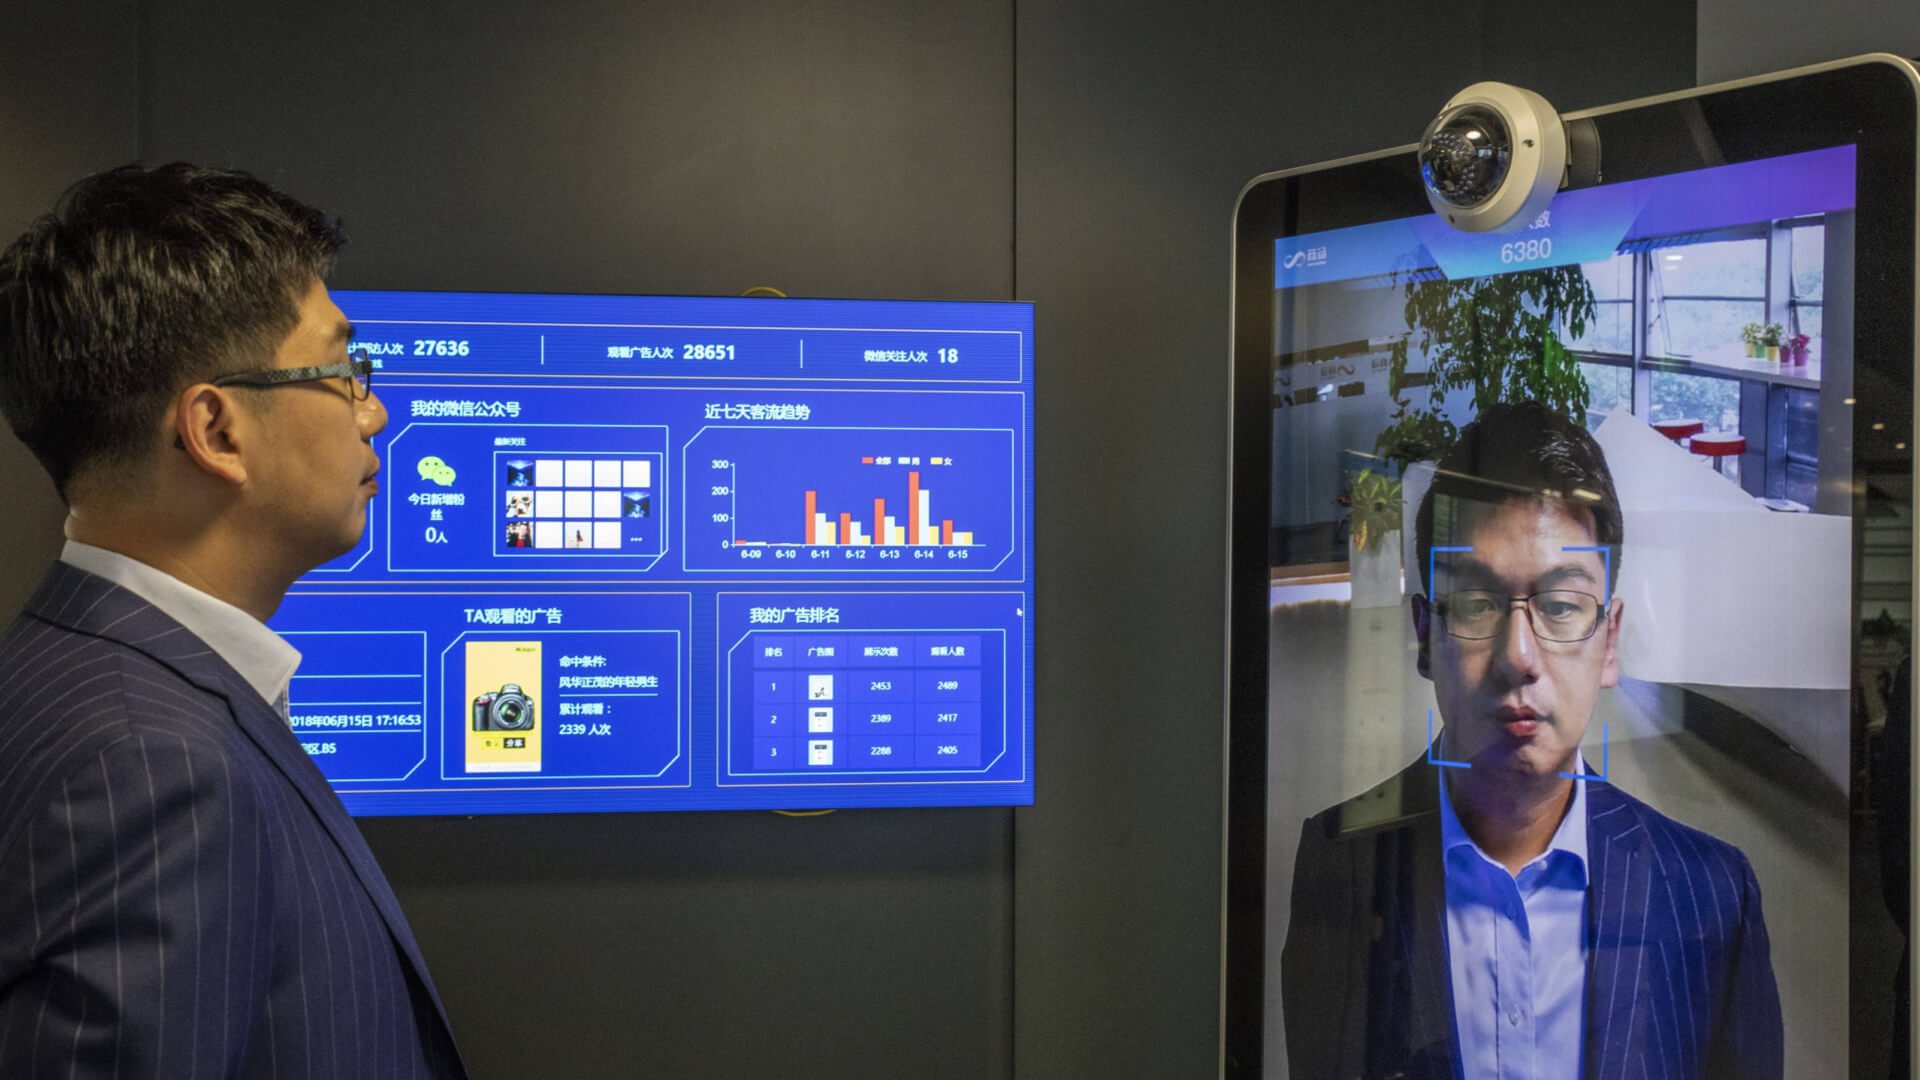  Integration of facial recognition to personalize customer experiences.